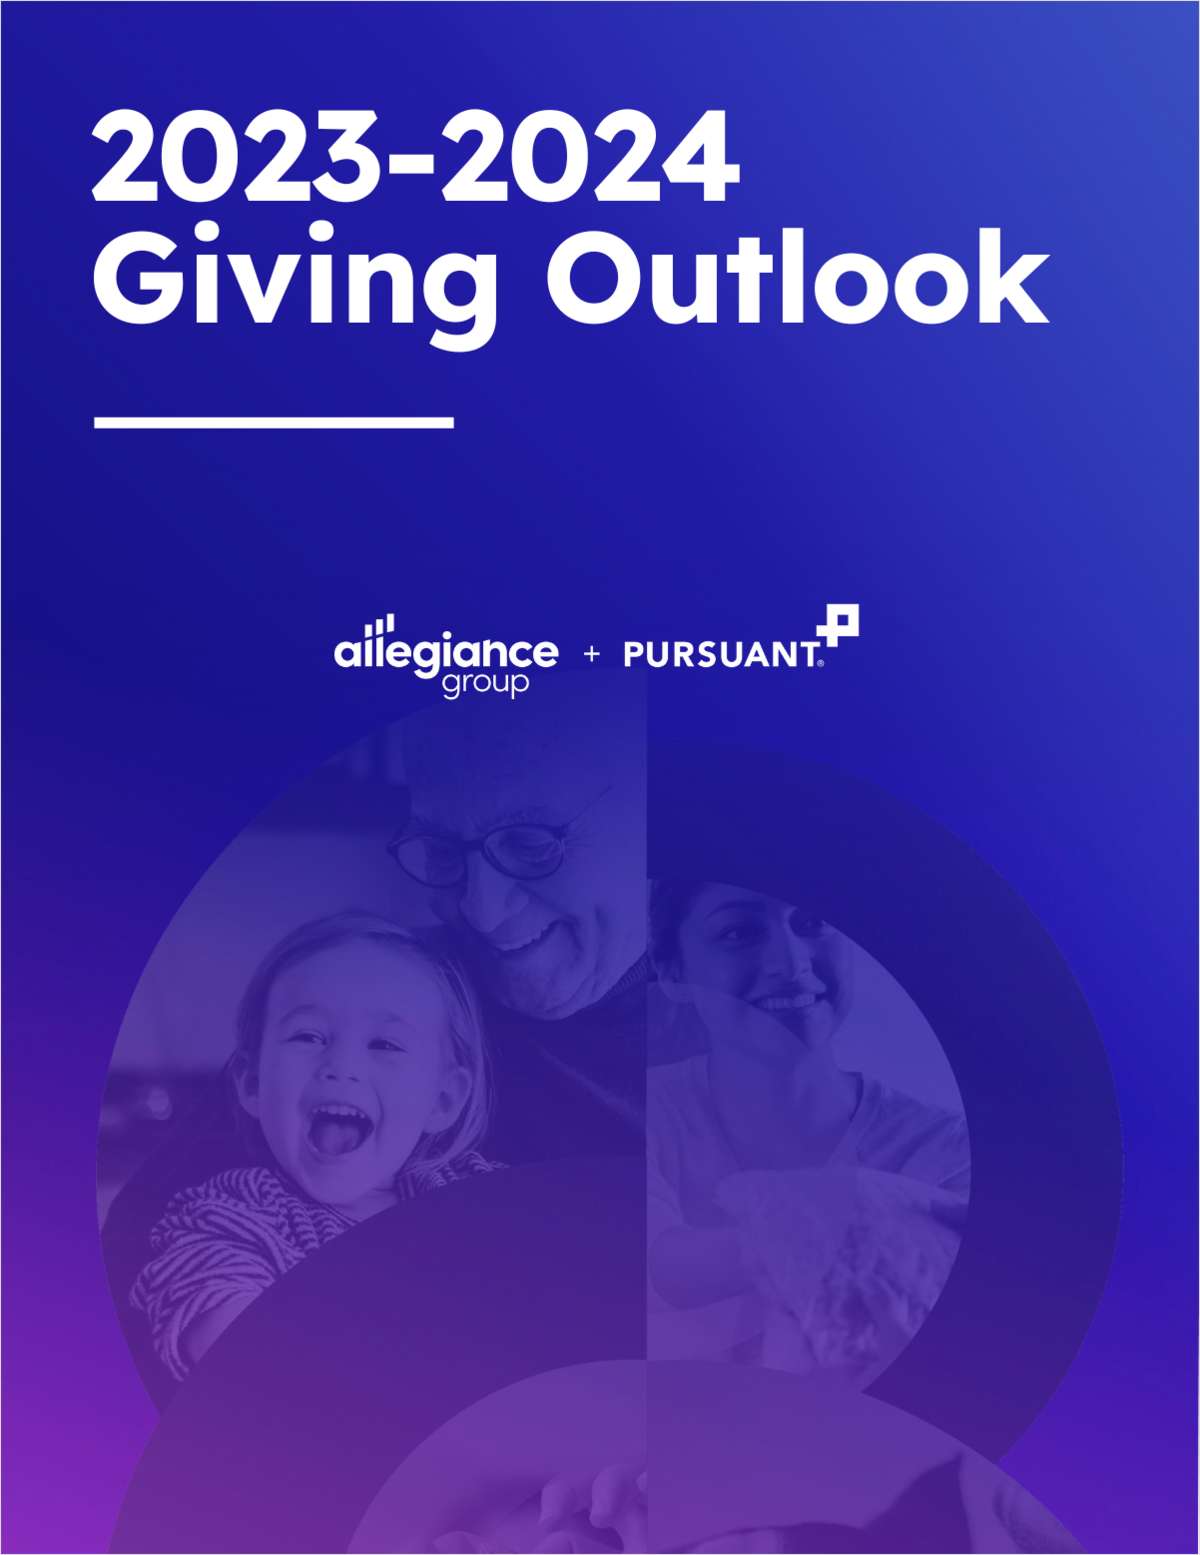 2023-2024 Giving Outlook